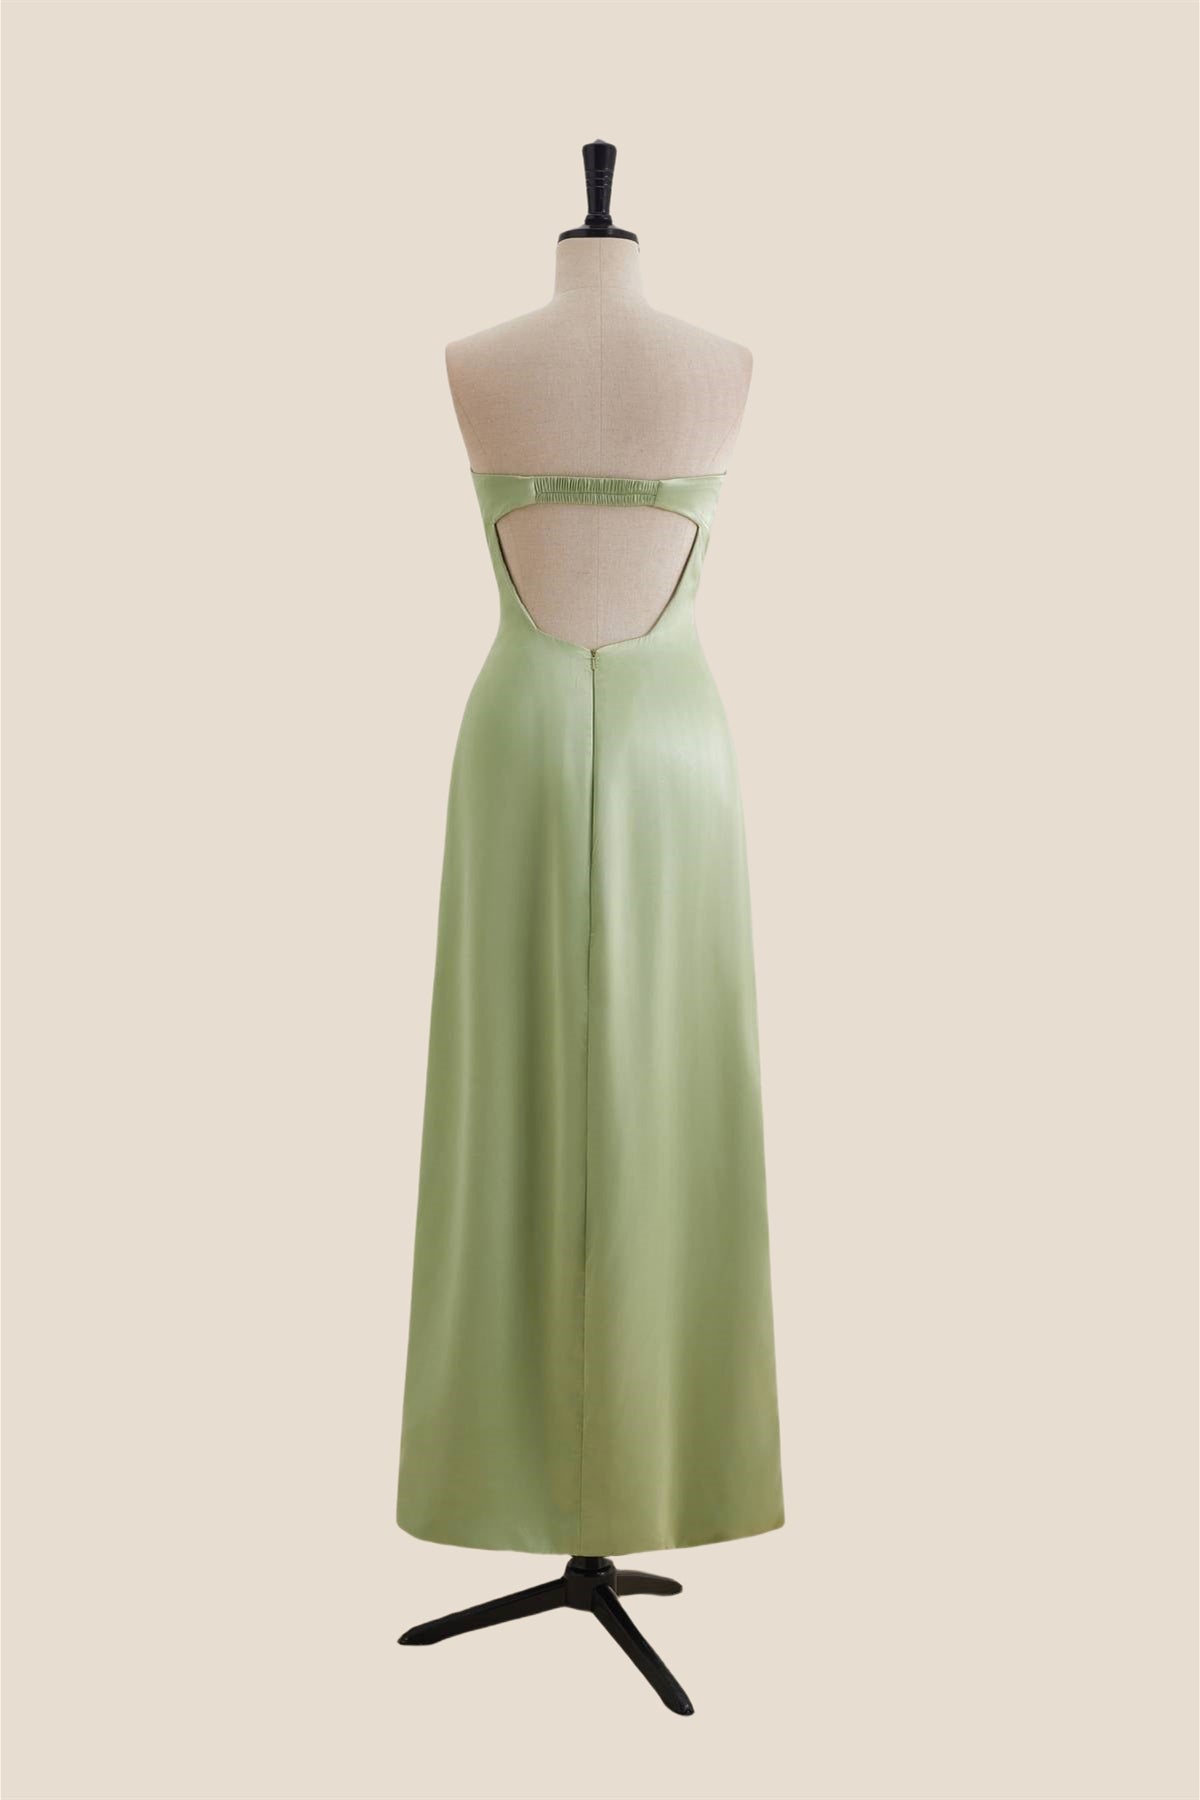 Strapless Sage Green A-line Long Party Dress